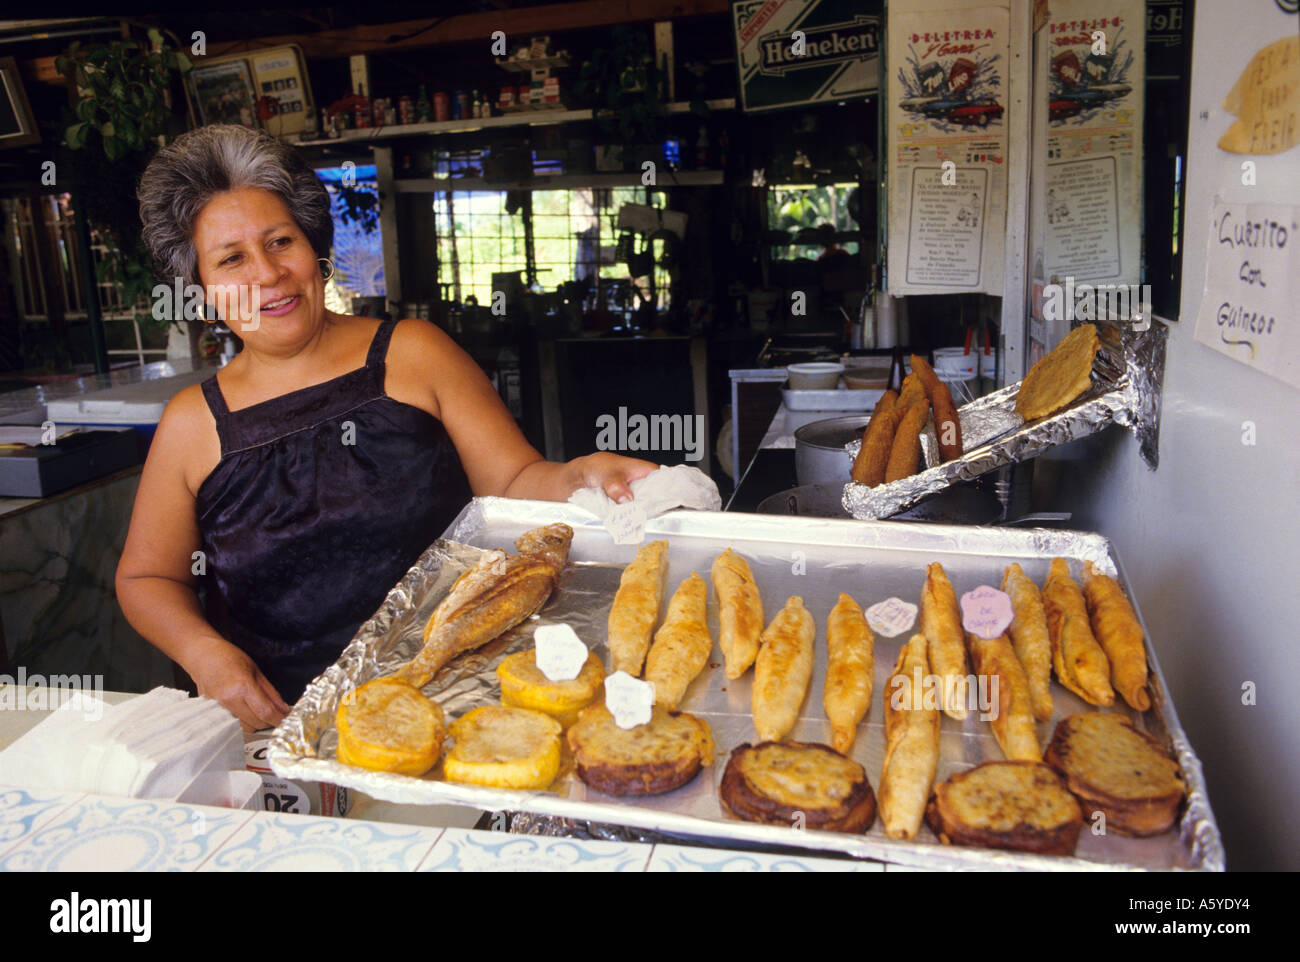 A woman sells fried Puerto Rican food at a sidewalk cafe in Puerto Rico. Stock Photo